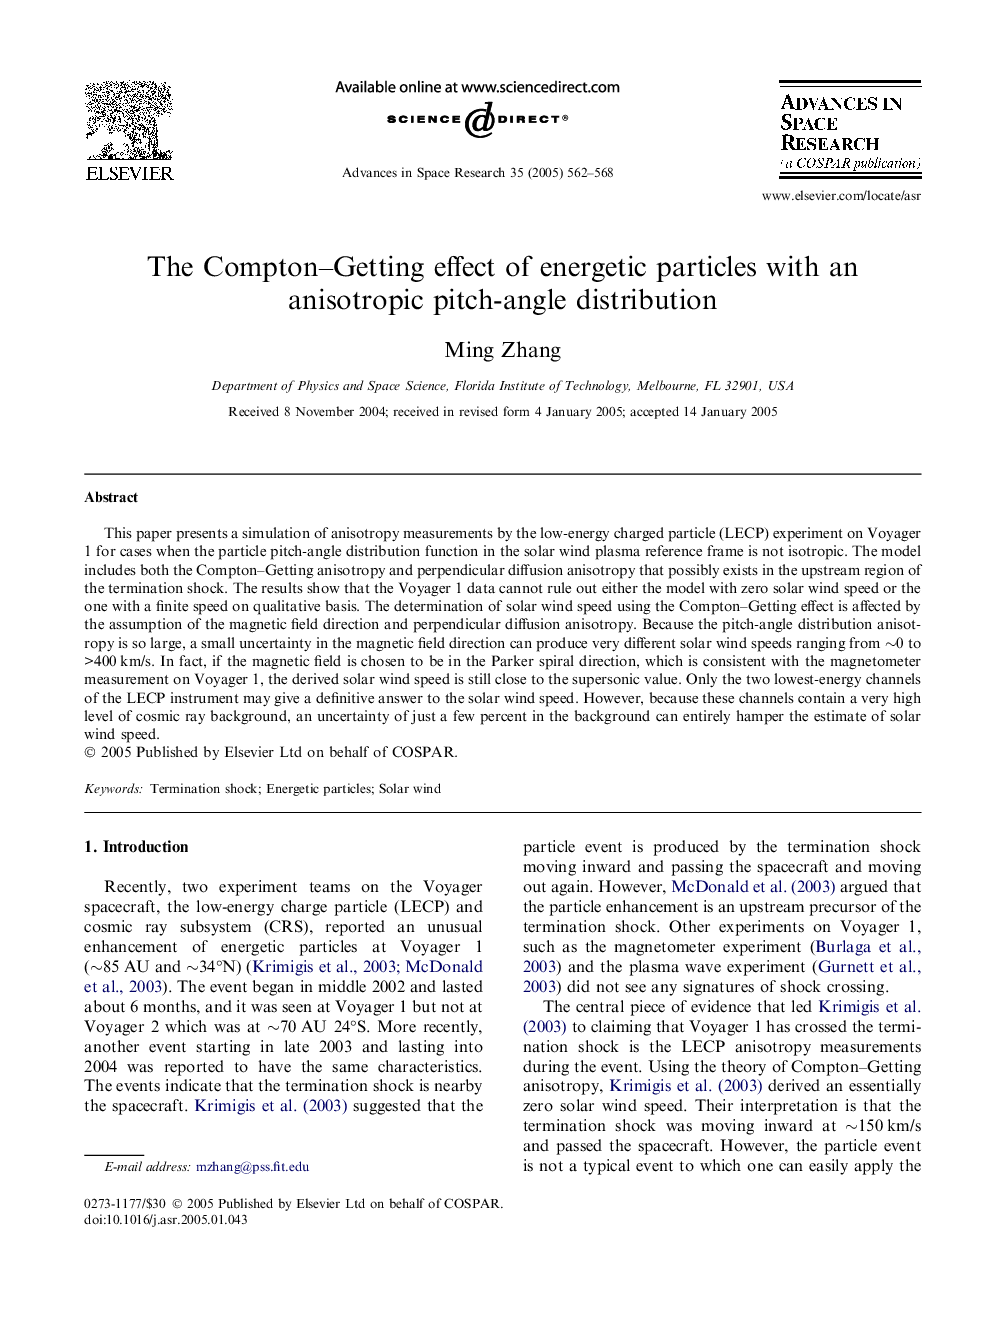 The Compton-Getting effect of energetic particles with an anisotropic pitch-angle distribution